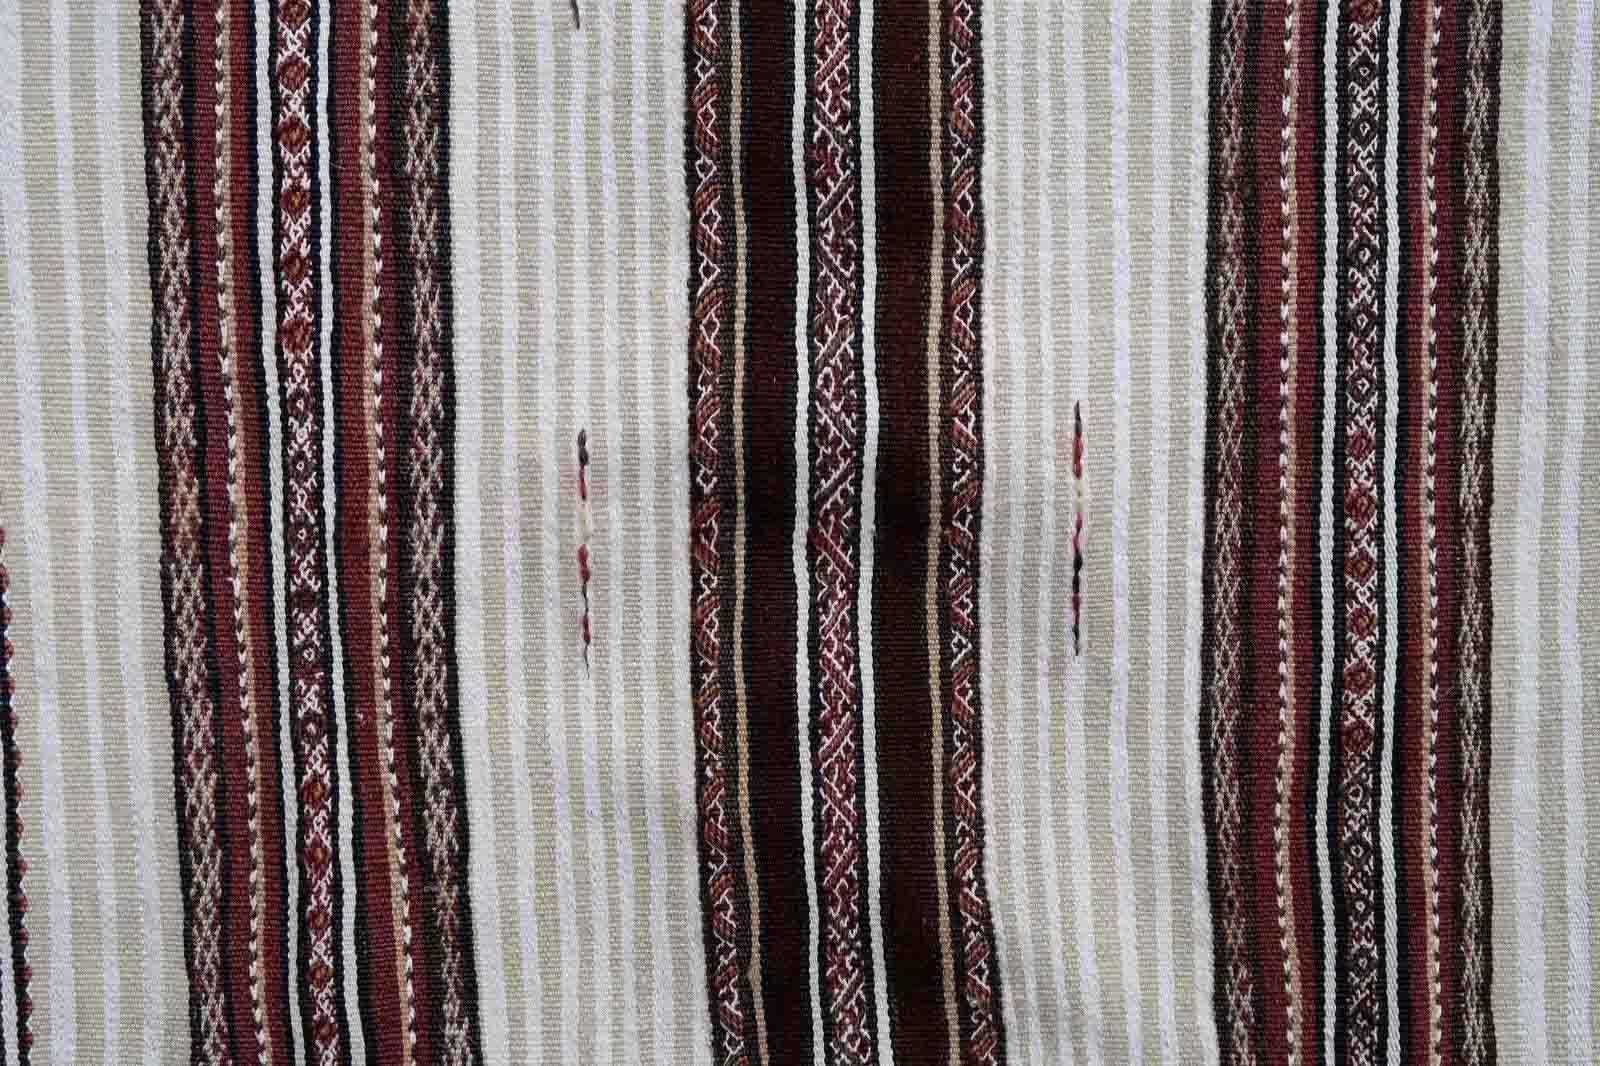 Handmade antique Moroccan Berber kilim from the middle Atlas region. The flatweave is from the beginning of 20th century in original condition, it has some signs of age.

-condition: original, some signs of age,

-circa: 1900s,

-size: 2.9' x